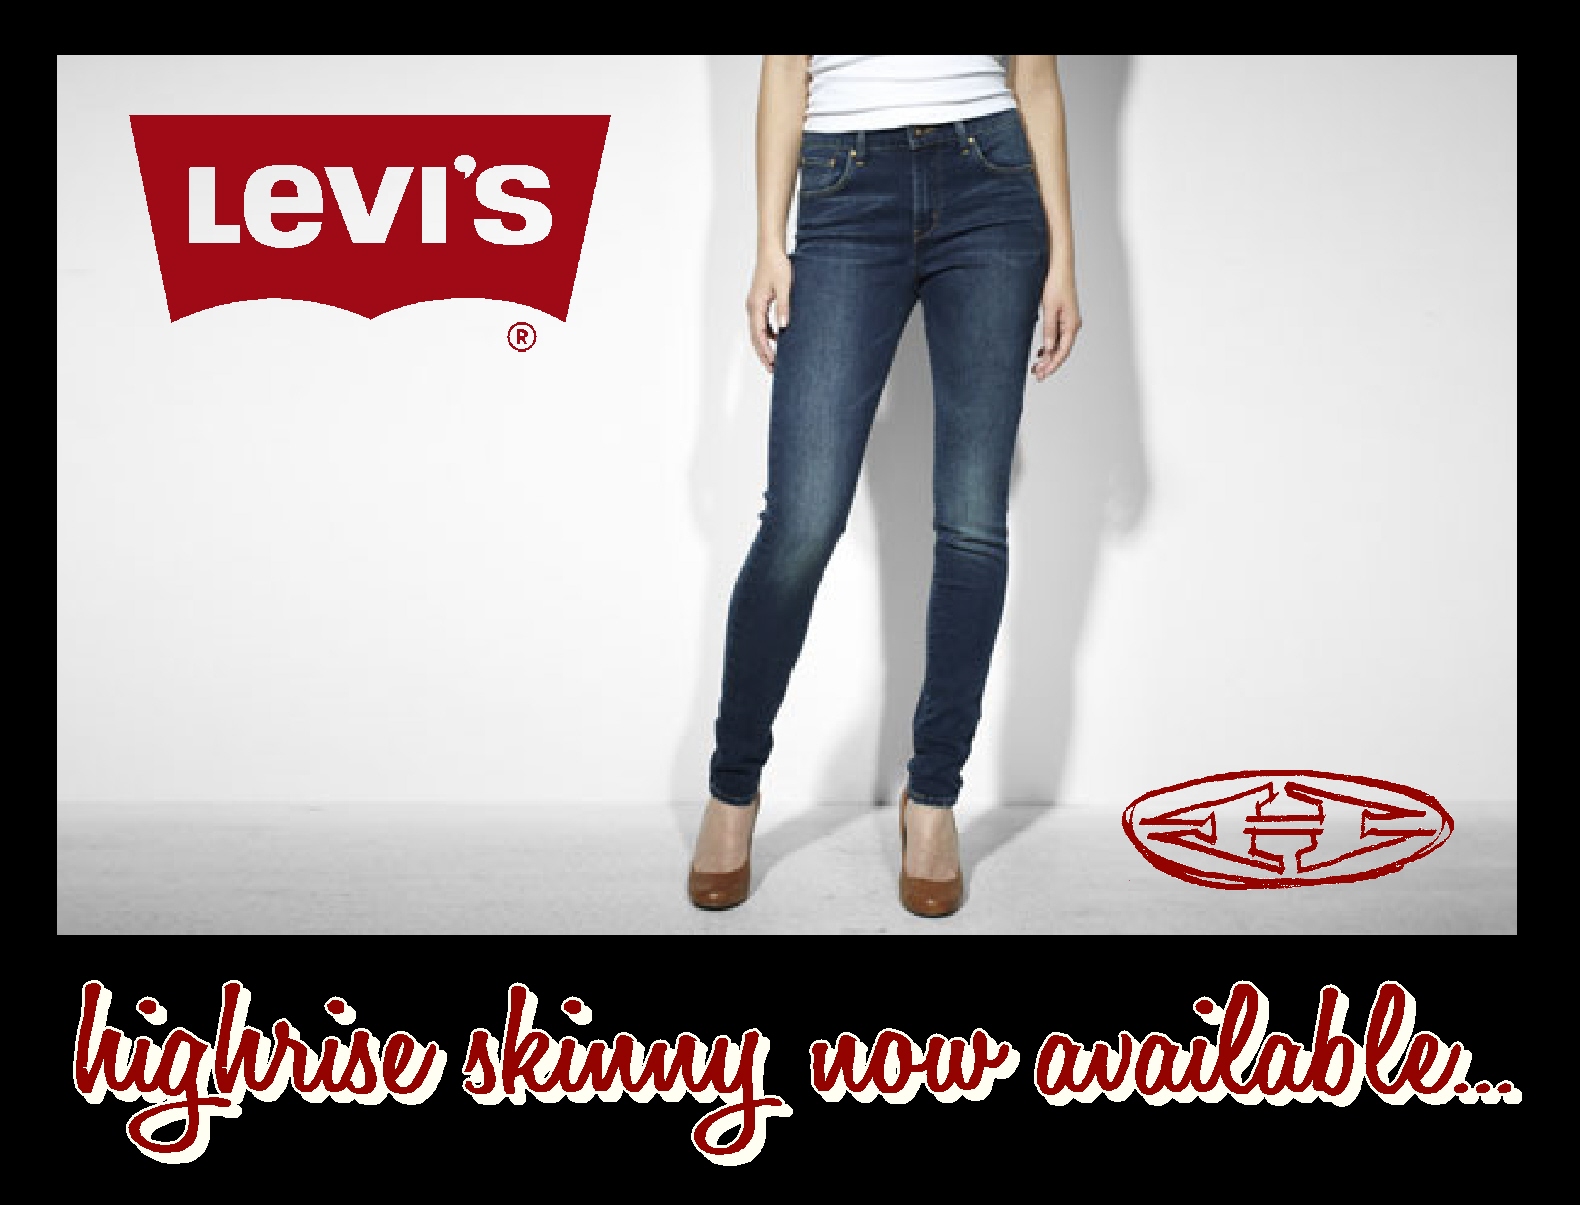 Hotline's Blog: these aren't your ordinary Levi's...